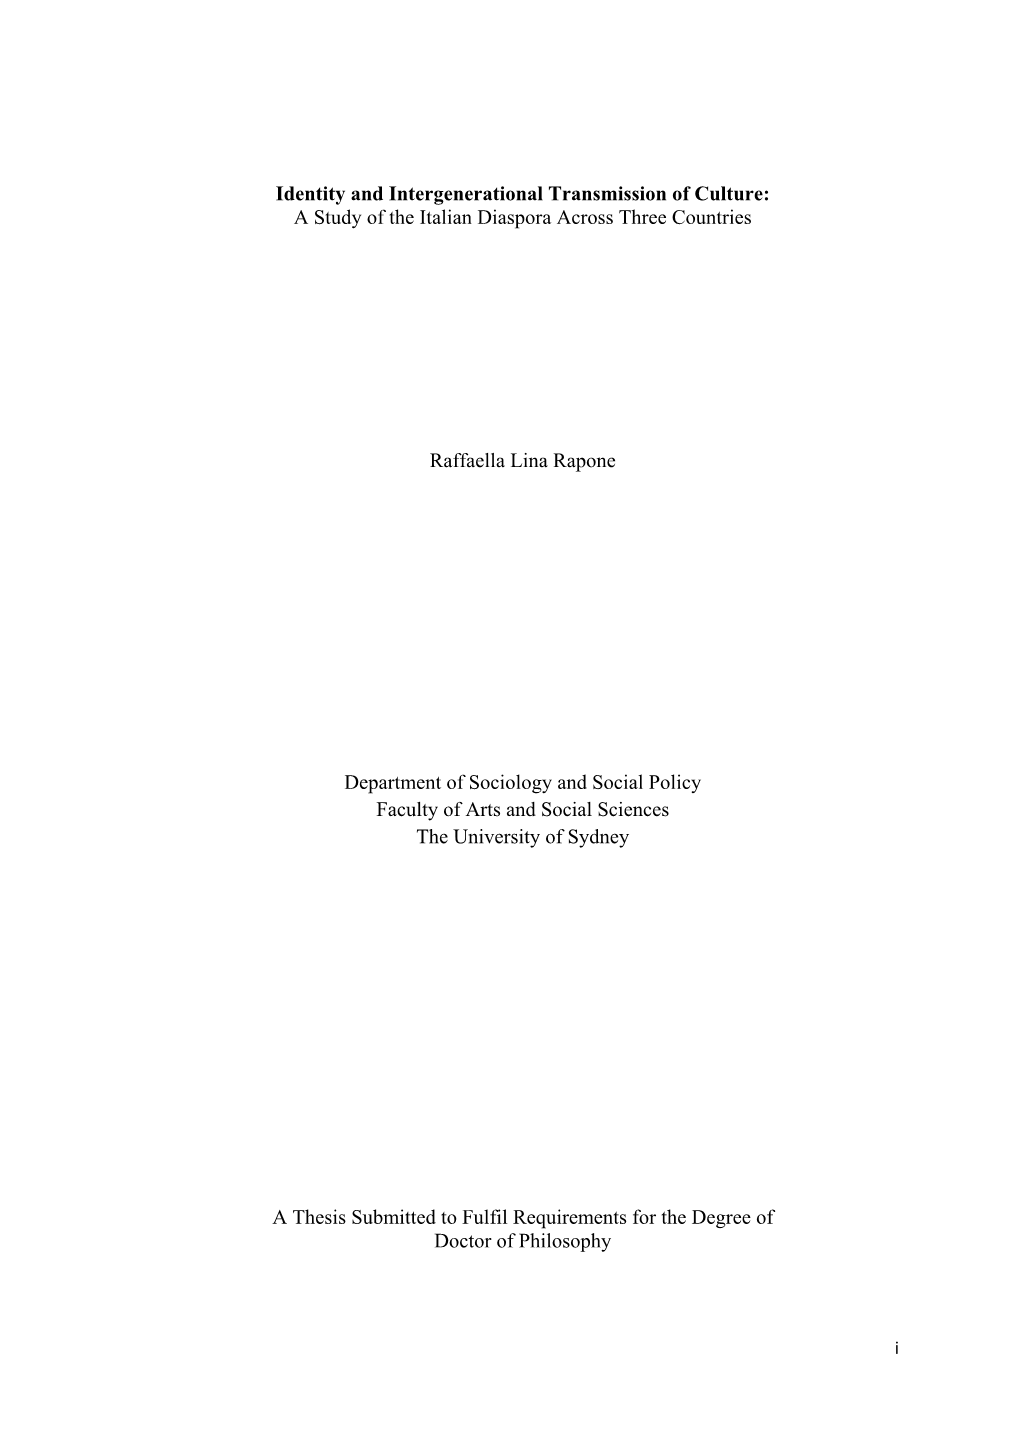 Thesis Submitted to Fulfil Requirements for the Degree of Doctor of Philosophy